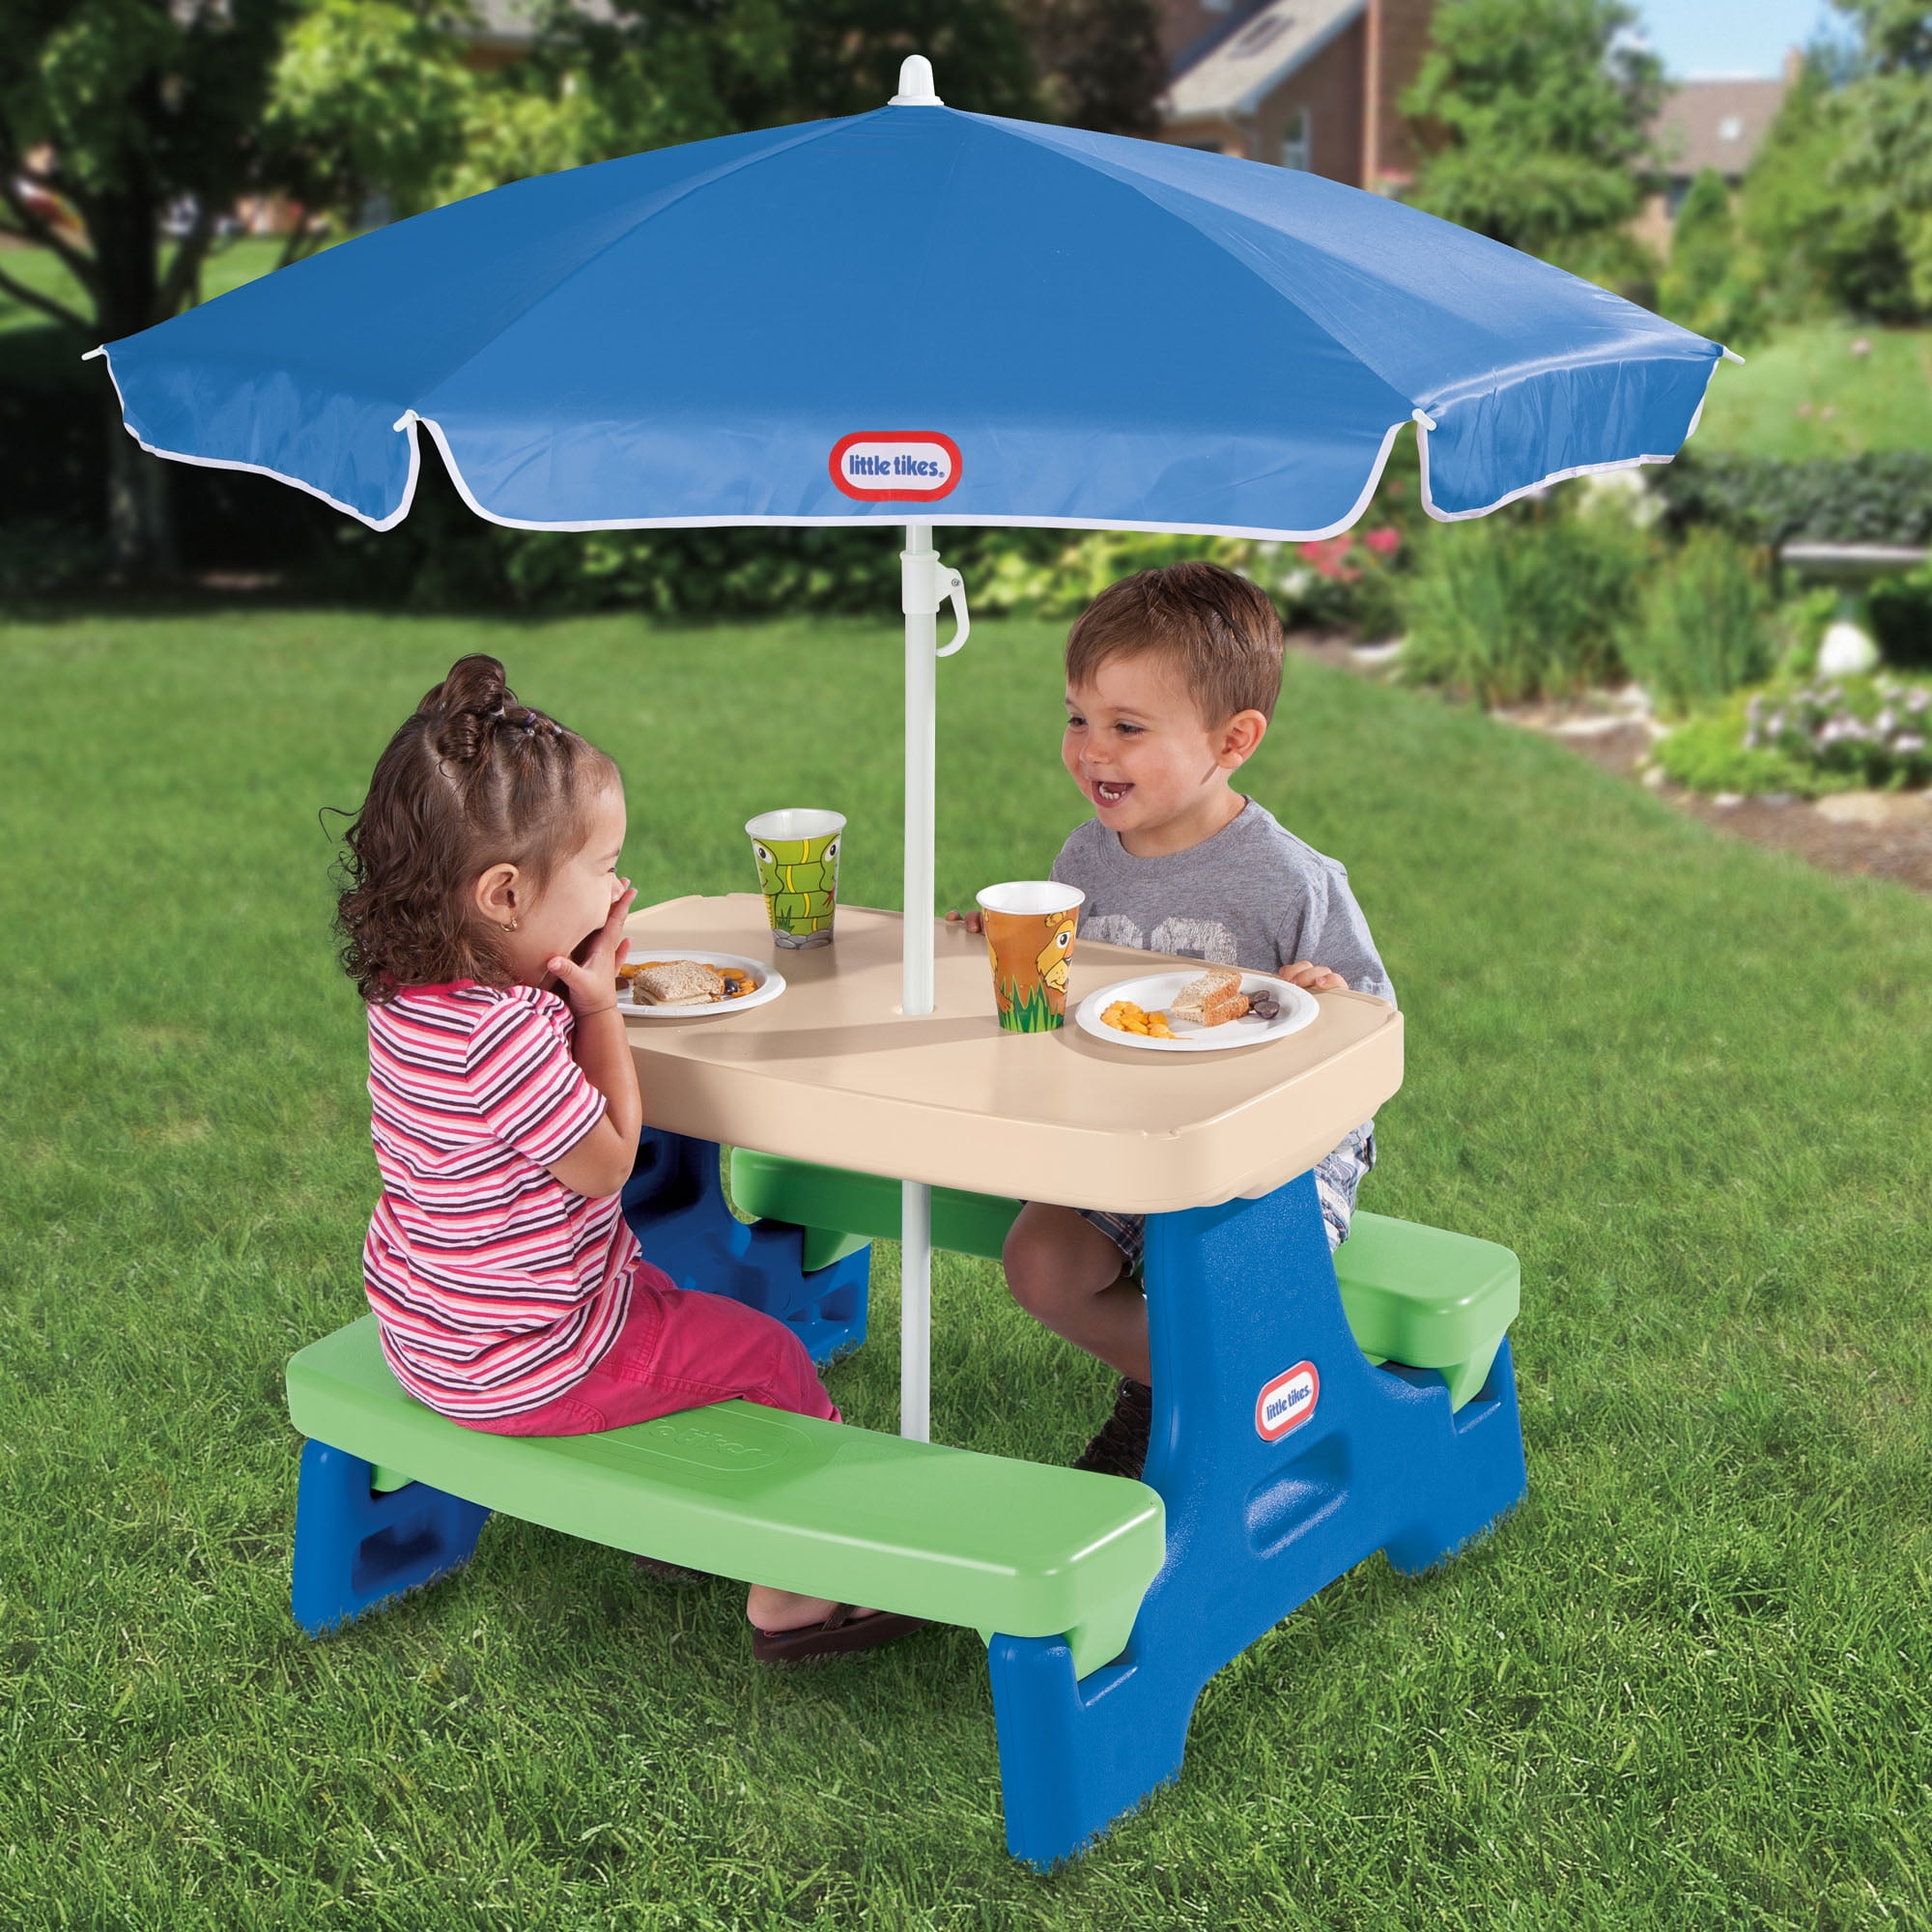 Little Tikes Easy Store Jr. Picnic Table with Umbrella, Blue & Green - Play Table with Umbrella, for Kids - 2